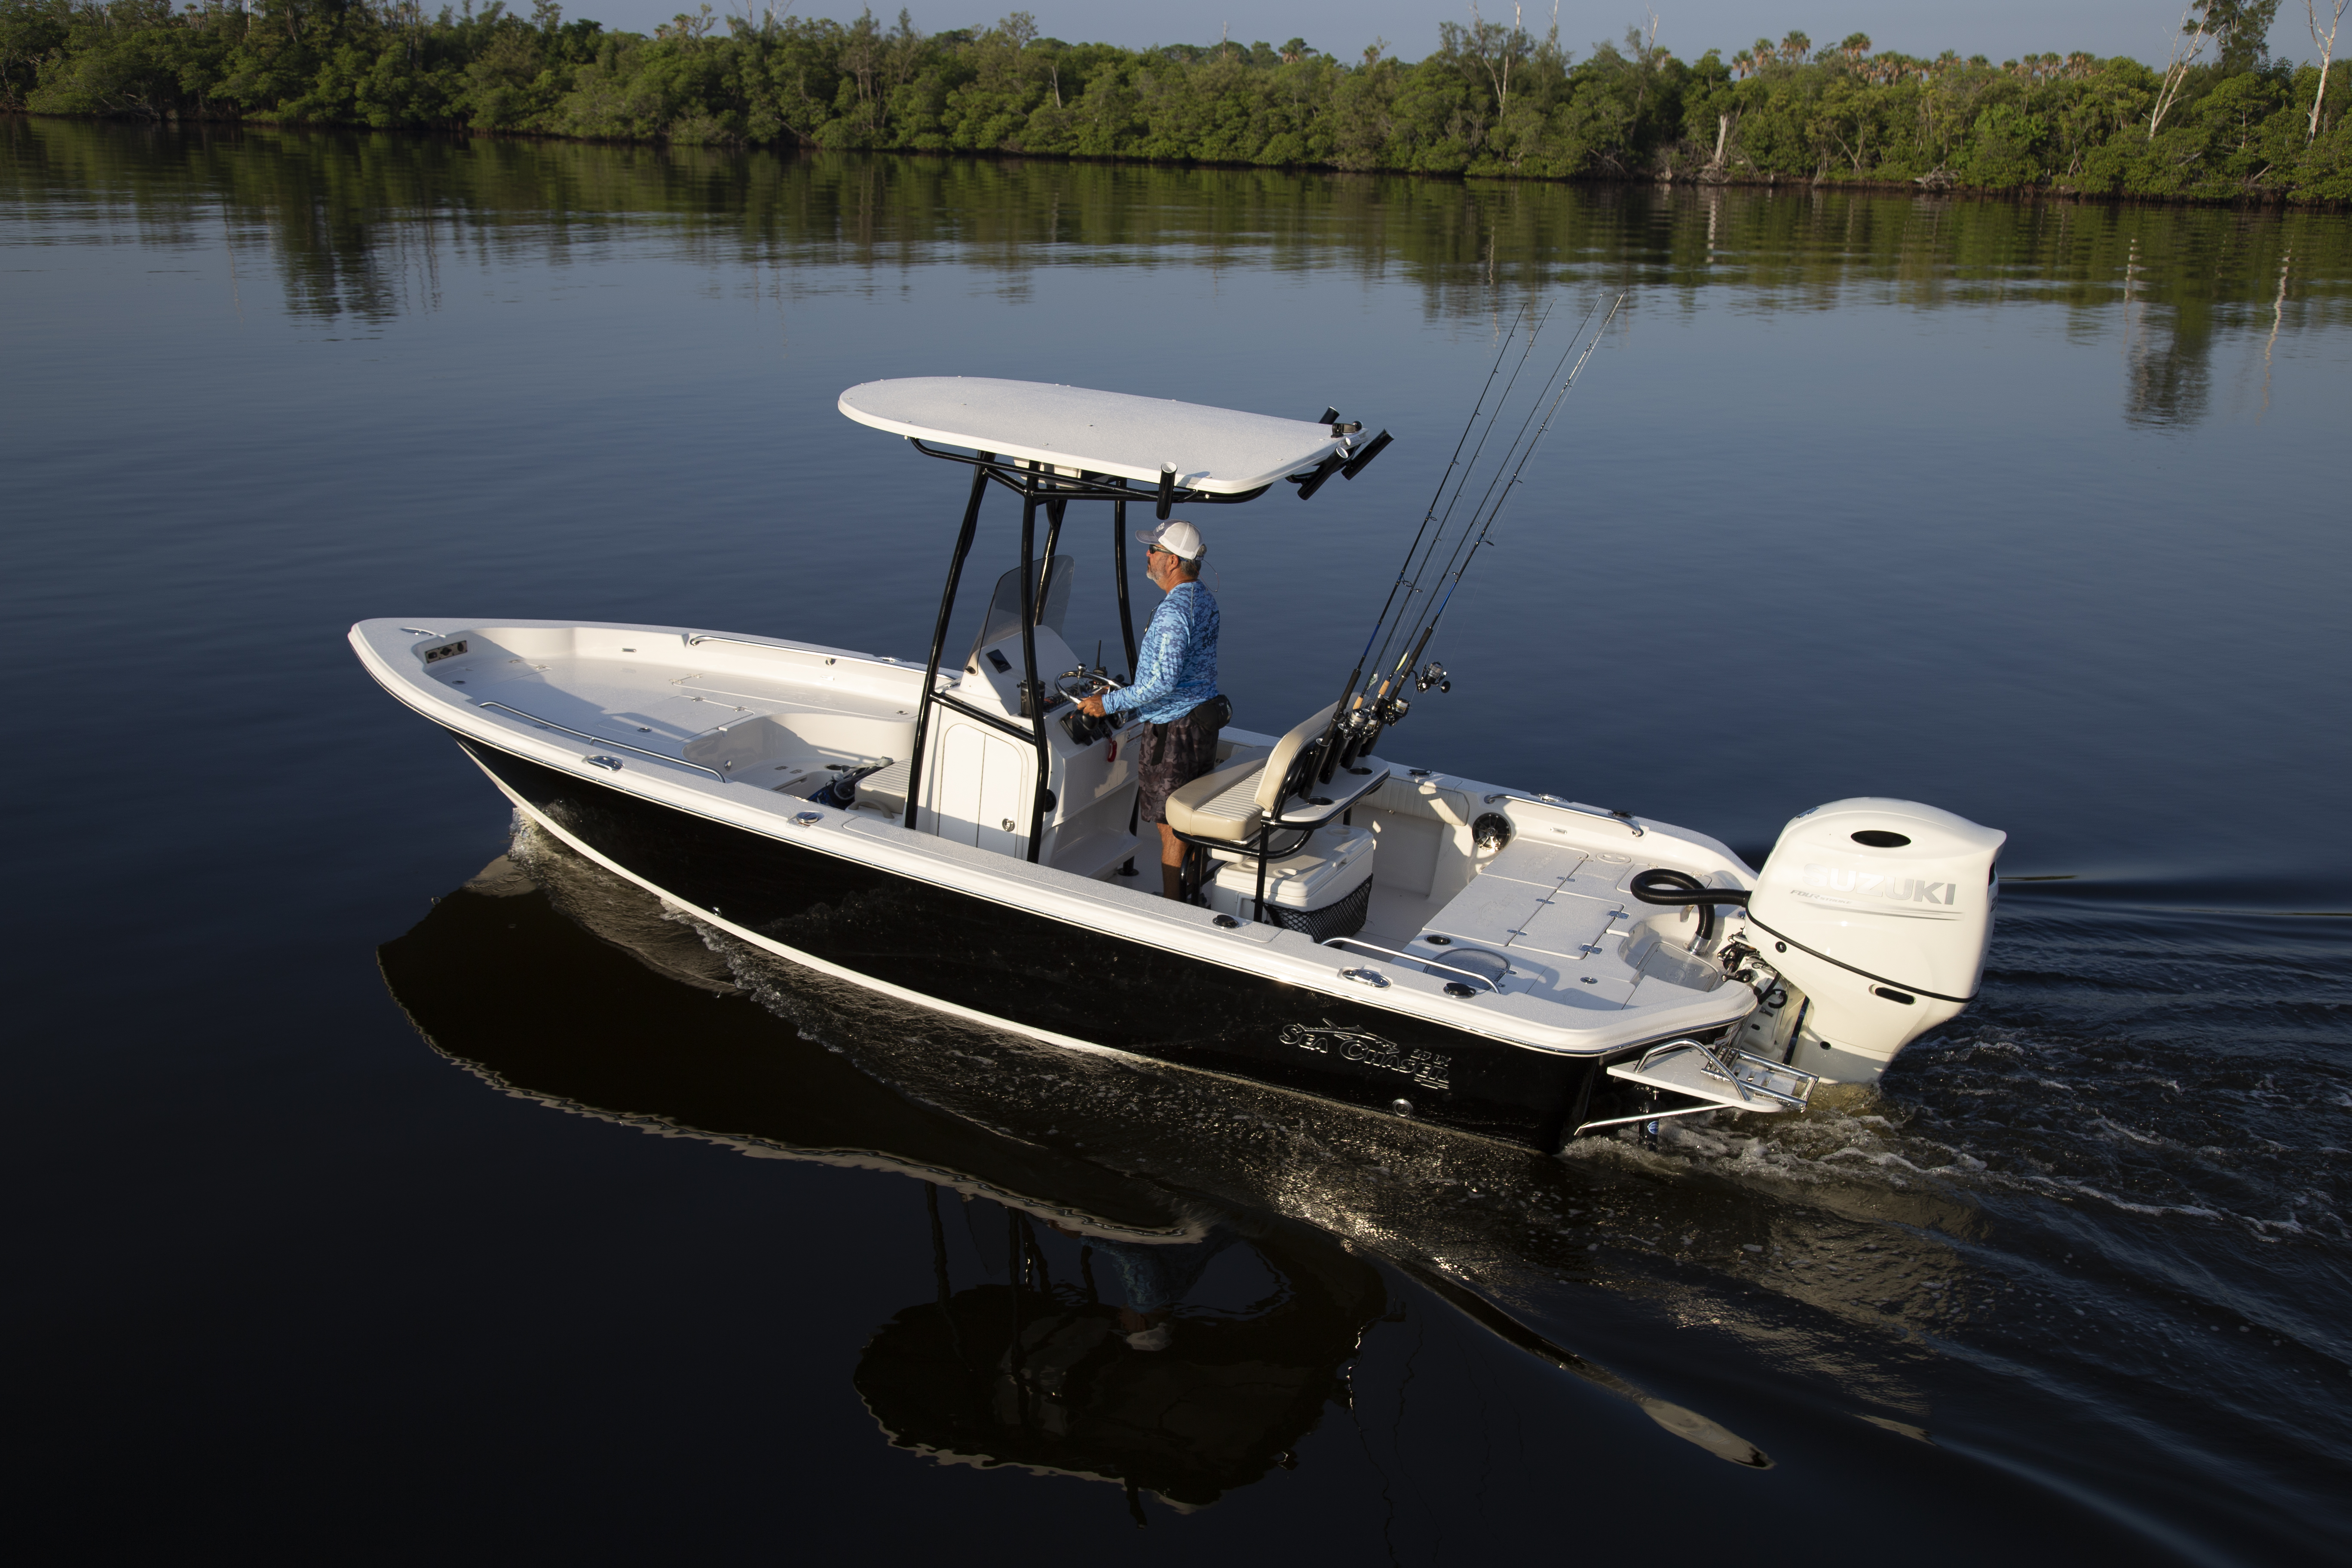 Boat Review - Sea Chaser 23 LX